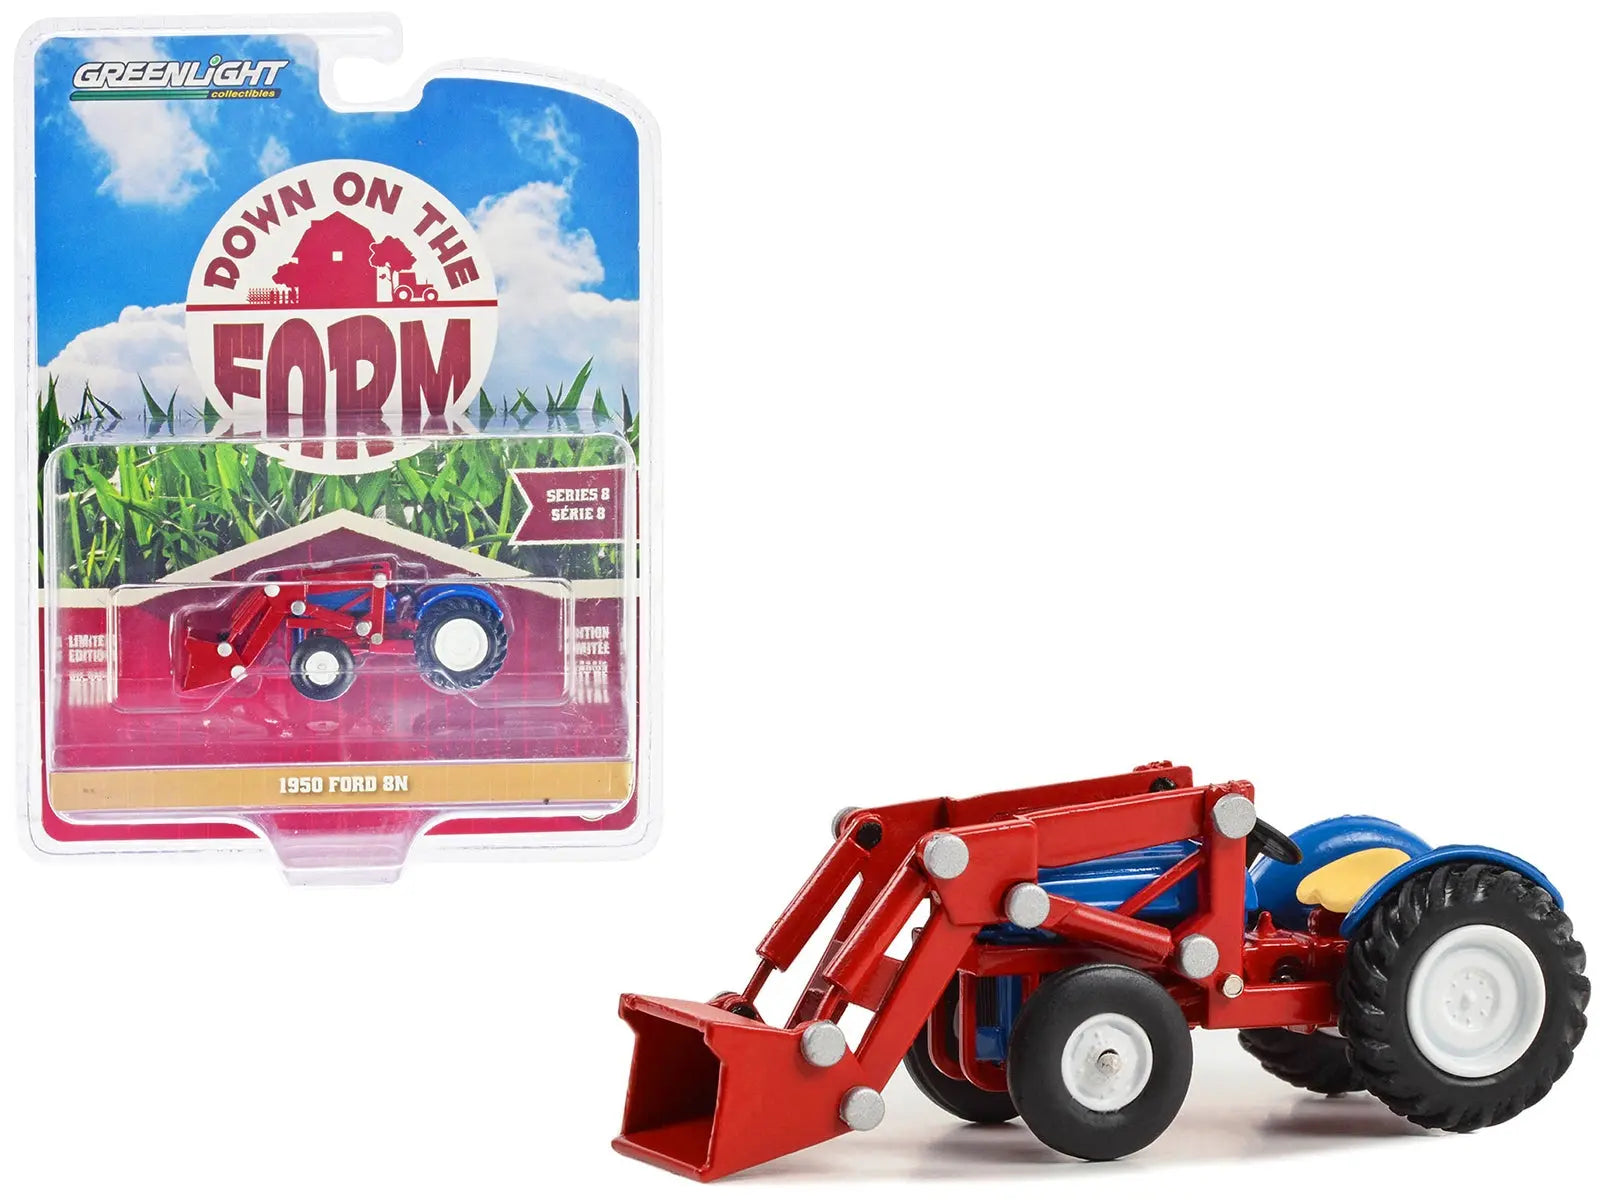 1950 Ford 8N Tractor with Front Loader Blue and Red "Down on the Farm" Series 8 1/64 Diecast Model by Greenlight Greenlight